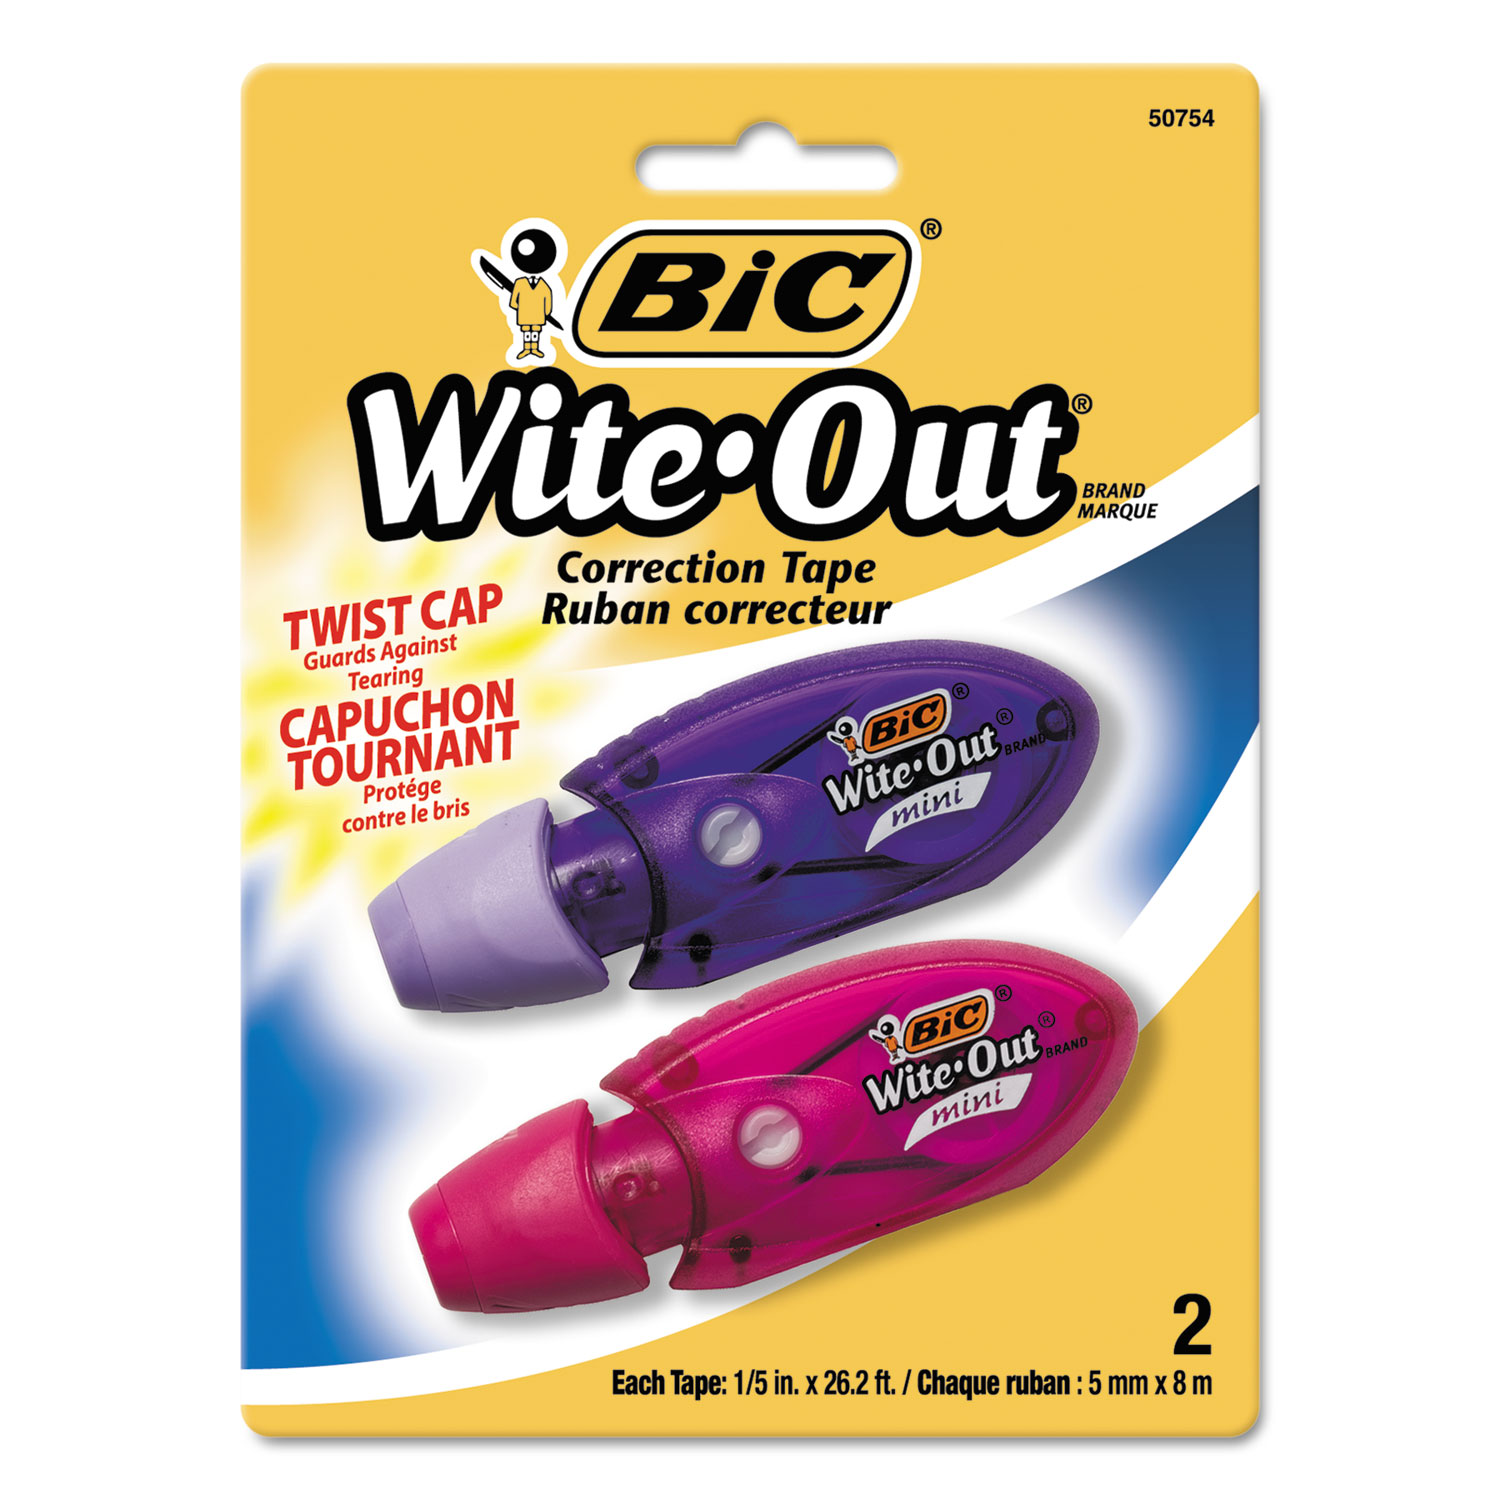  BIC WOMTP21 Wite-Out Mini Twist Correction Tape, Non-Refillable, 1/5 x 314, 2/Pack (BICWOMTP21) 